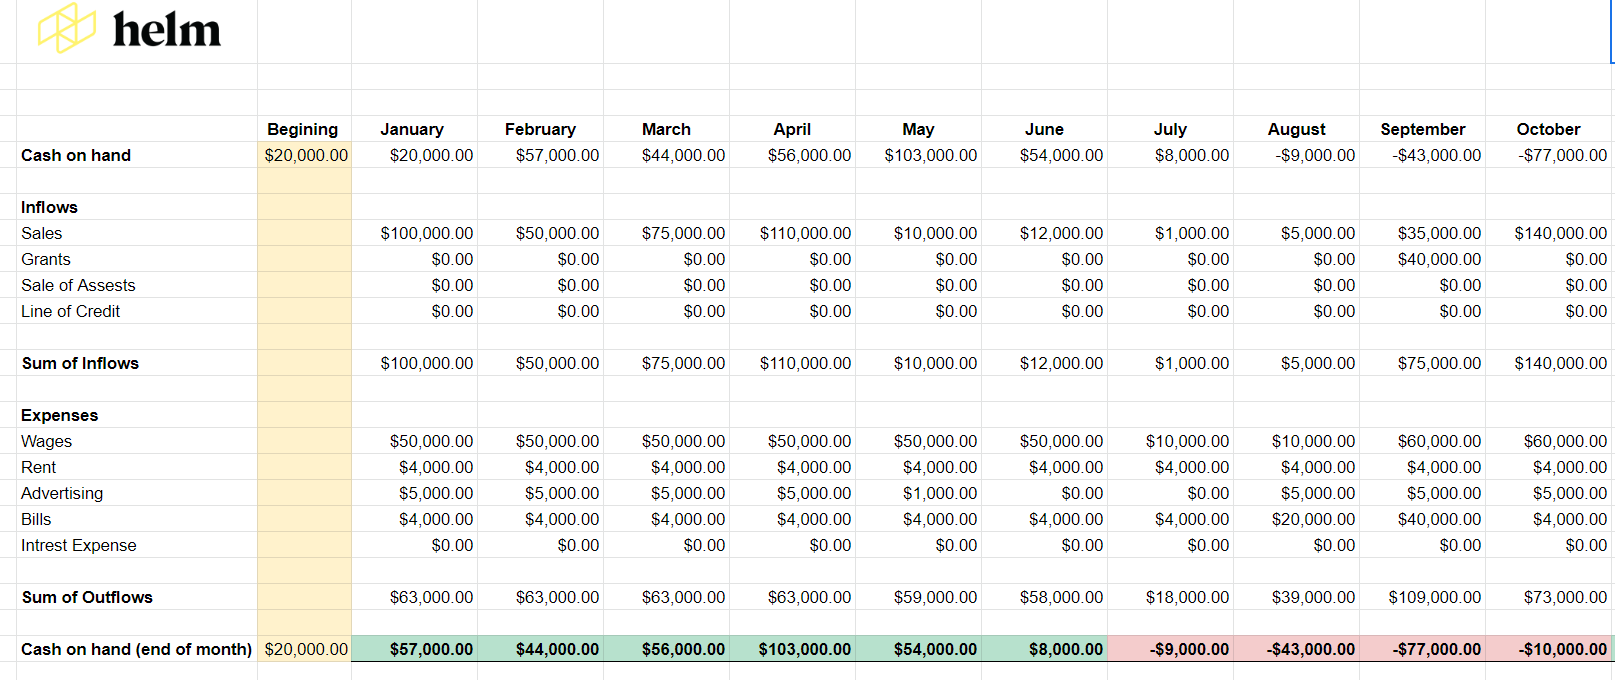 Free cash flow forecasting template